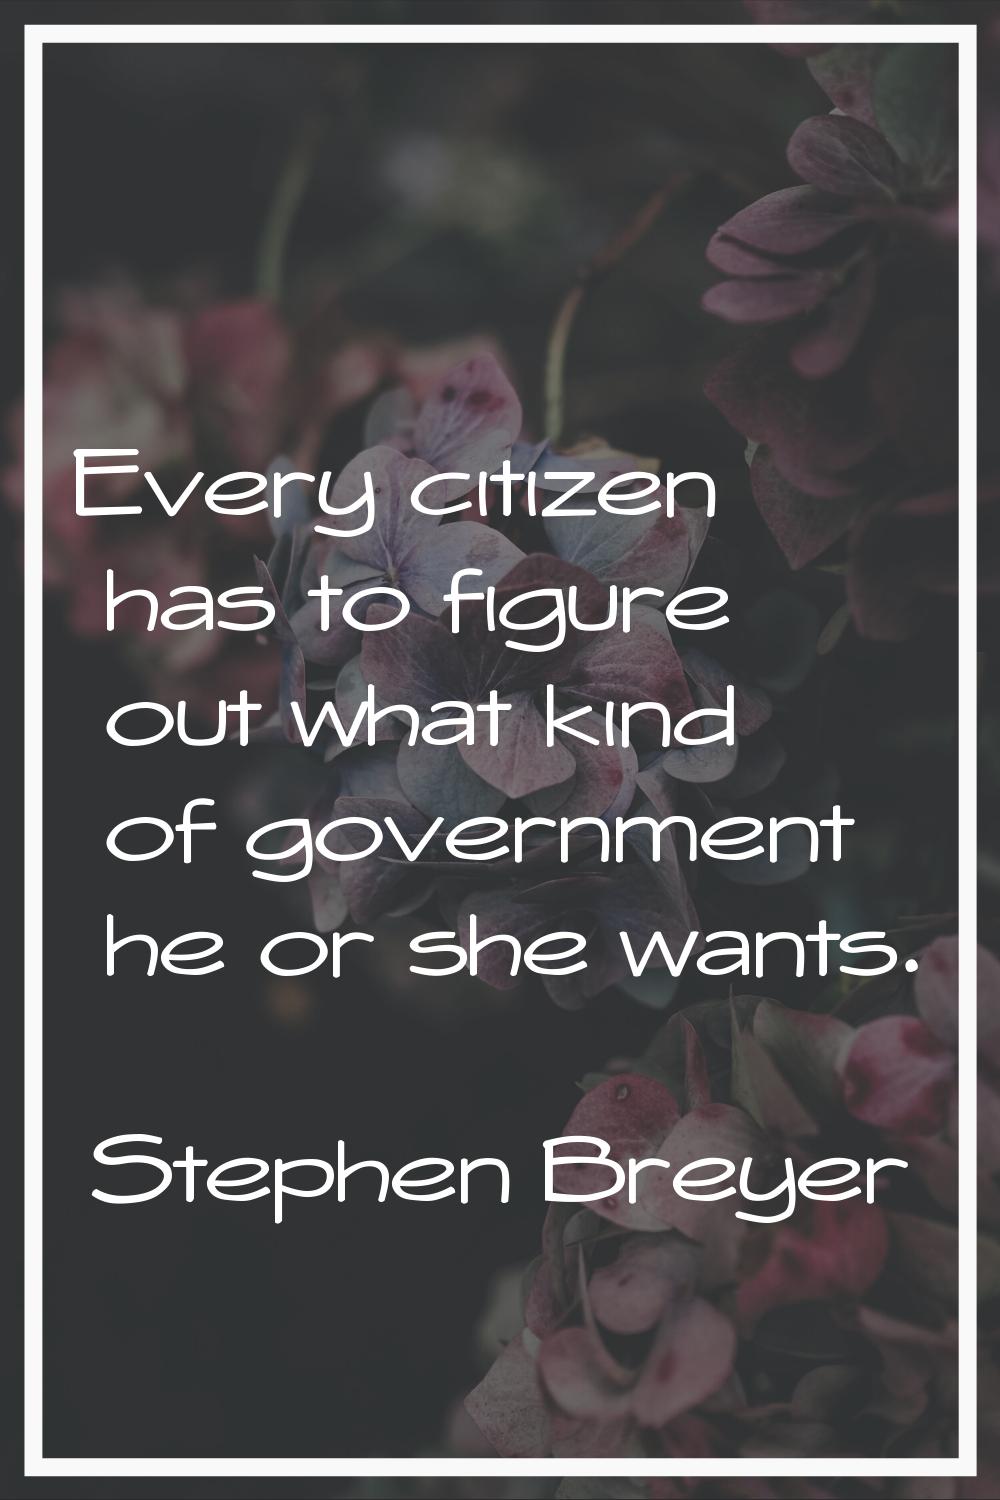 Every citizen has to figure out what kind of government he or she wants.